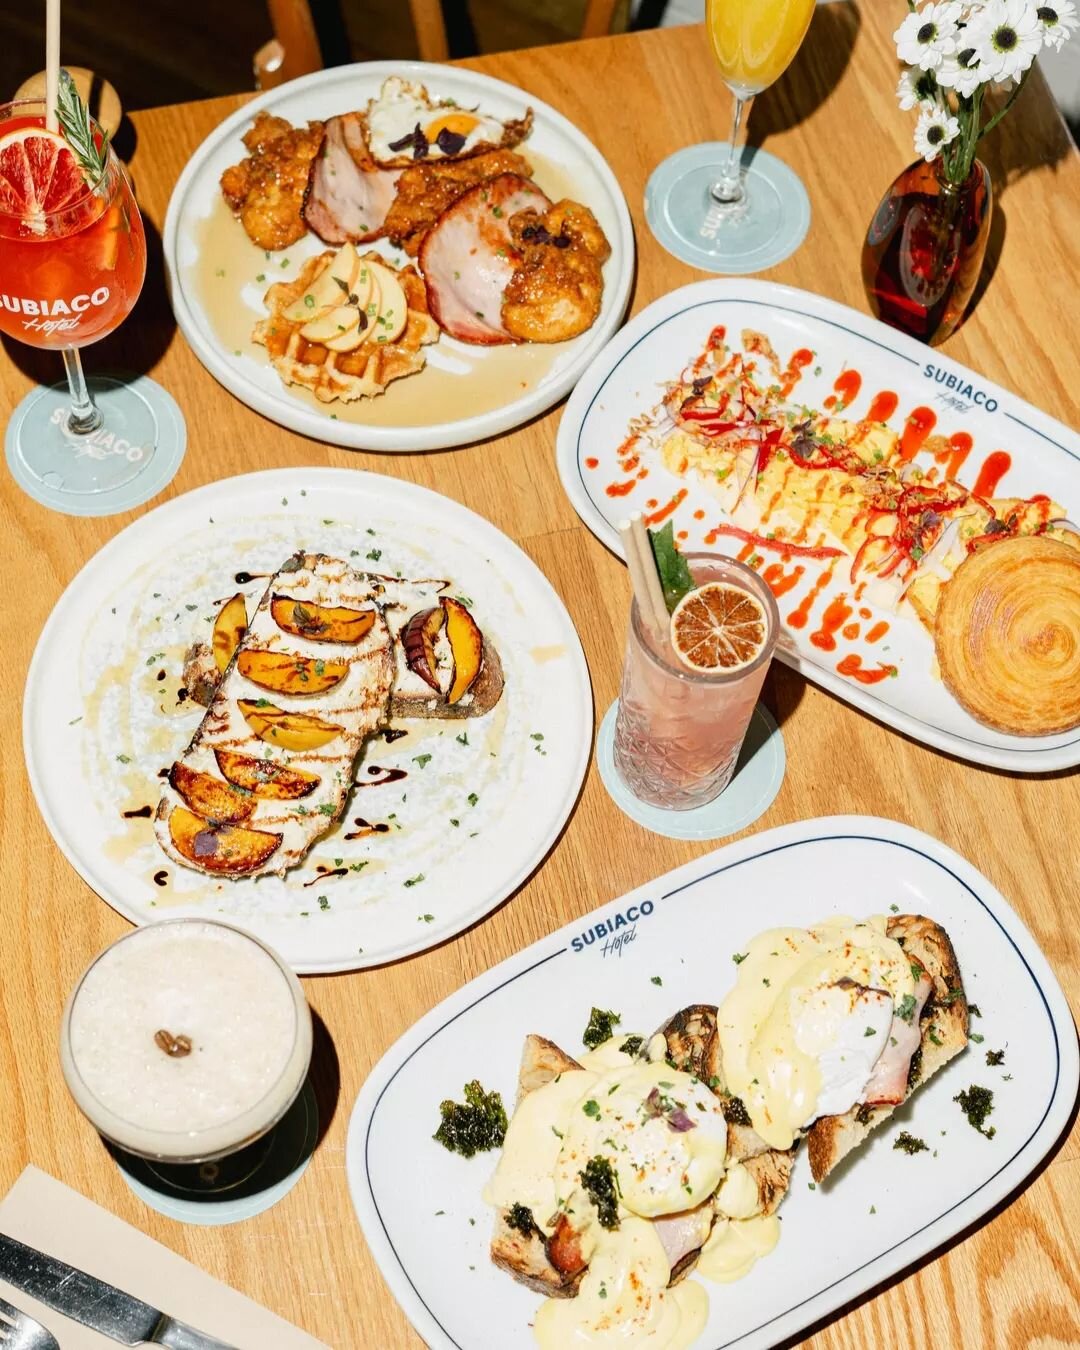 Bottomless Brunch at the Subi has never been better&nbsp;☆

Join us every Saturday morning and choose between all your brunch favourites. From Egg's Benny to our Fried Chicken &amp; Waffles, we've got you covered!

We've got 2 hours of boozy bliss wa